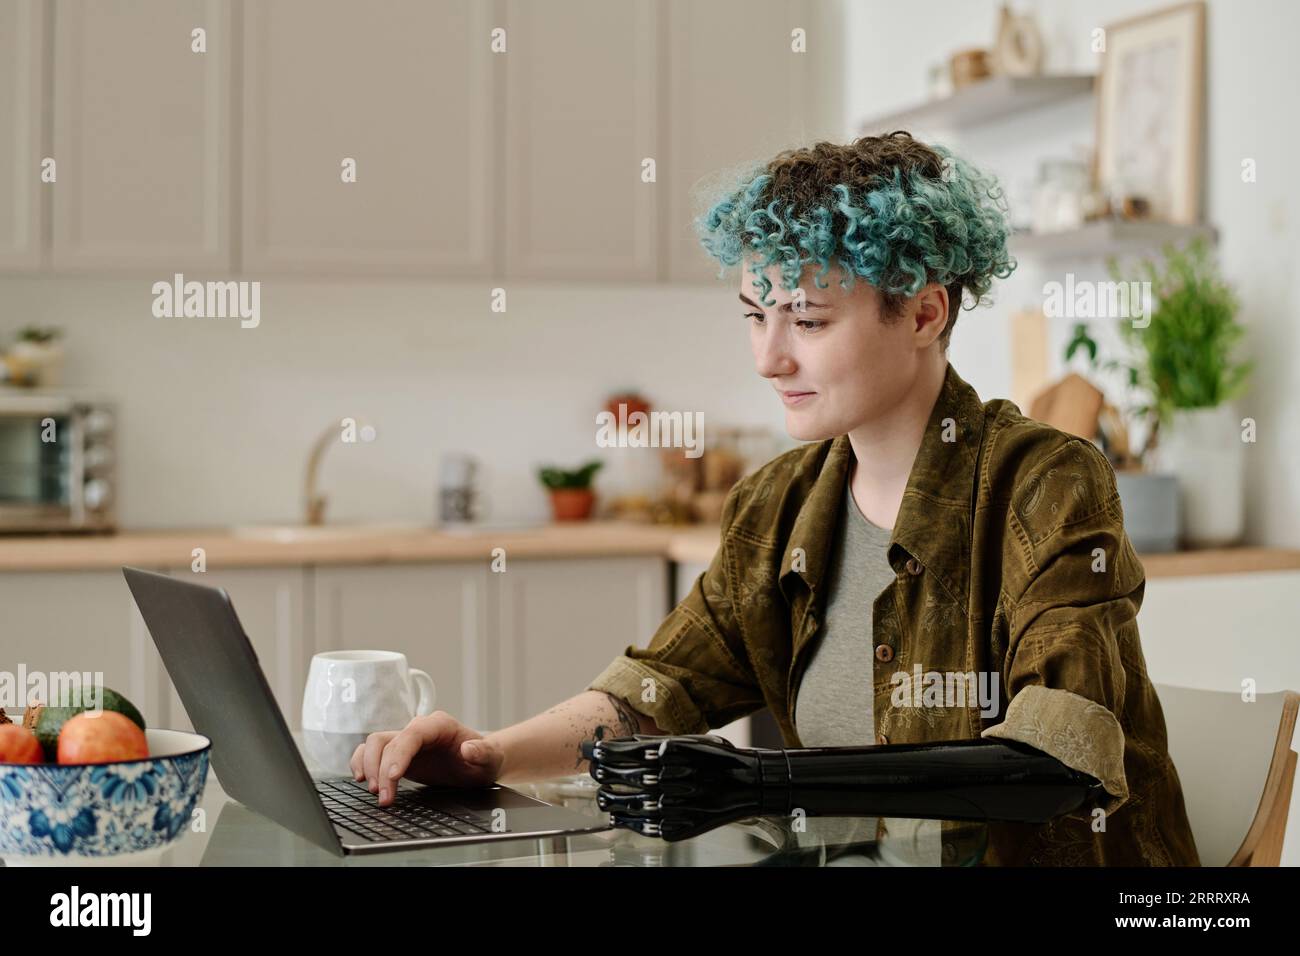 Young woman with prosthetic arm working on laptop while sitting in the kitchen Stock Photo